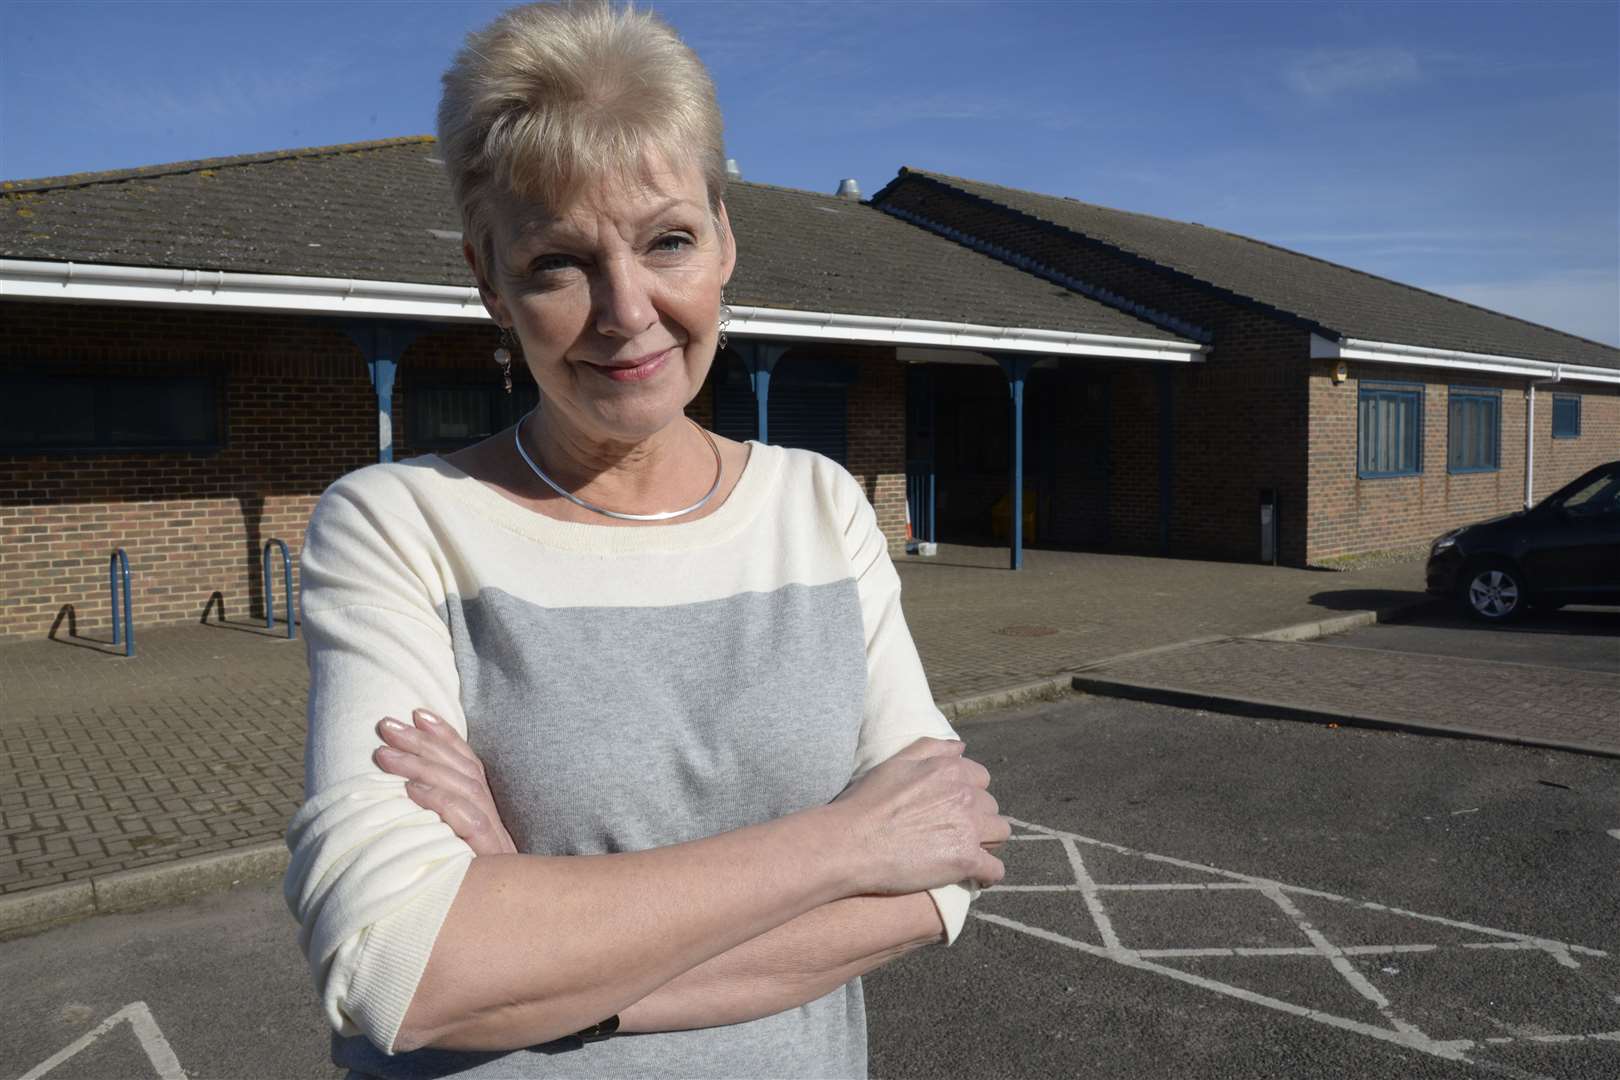 Paula Spencer says the development is causing problems within the Thanington community